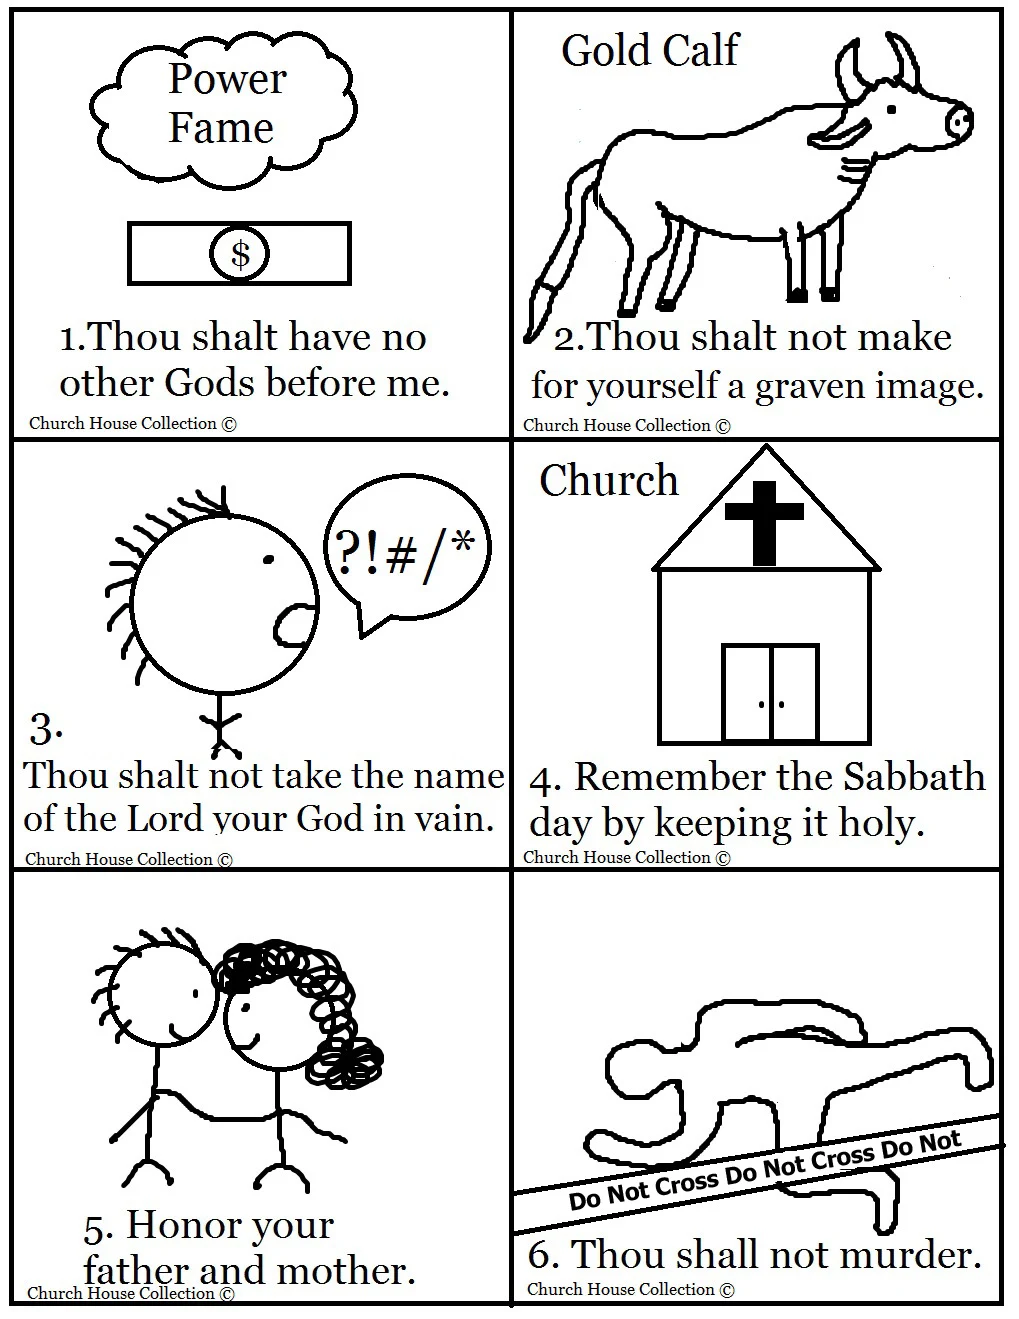 Church House Collection Blog 10 Commandments Bible Matching Game